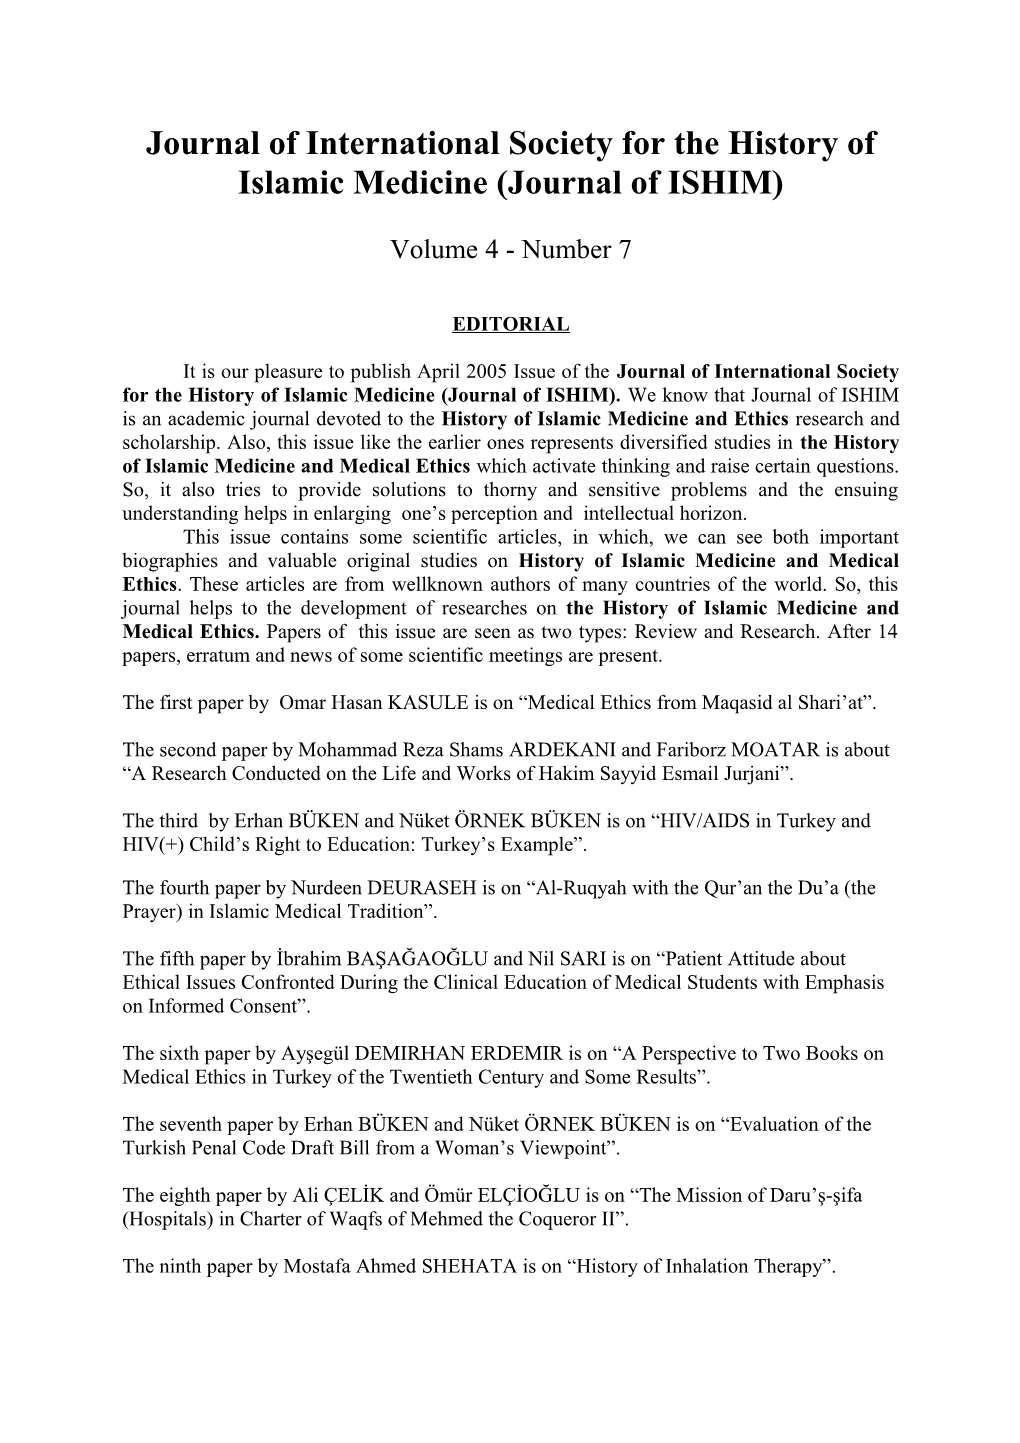 Journal of International Society for the History of Islamic Medicine (Journal of ISHIM)